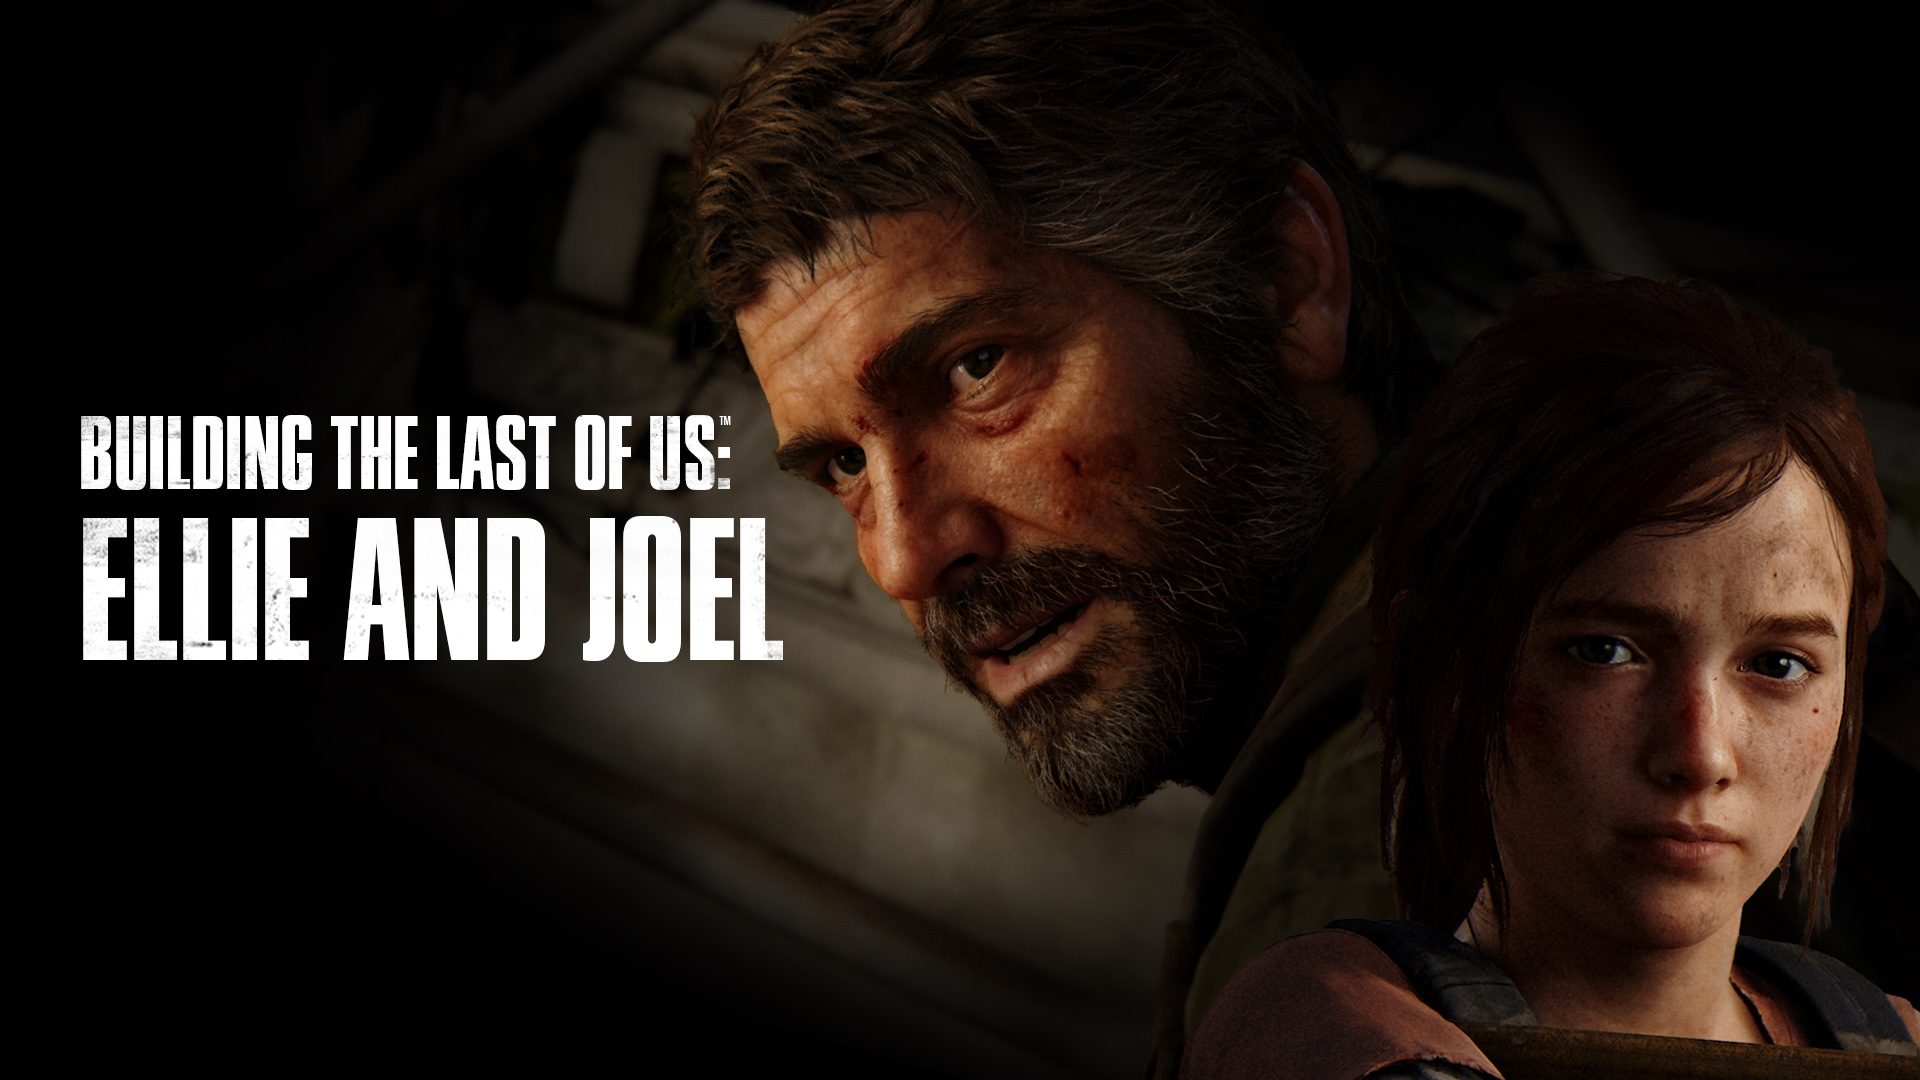 The Last of Us: Episode 4 Truly Starts Joel and Ellie's Story